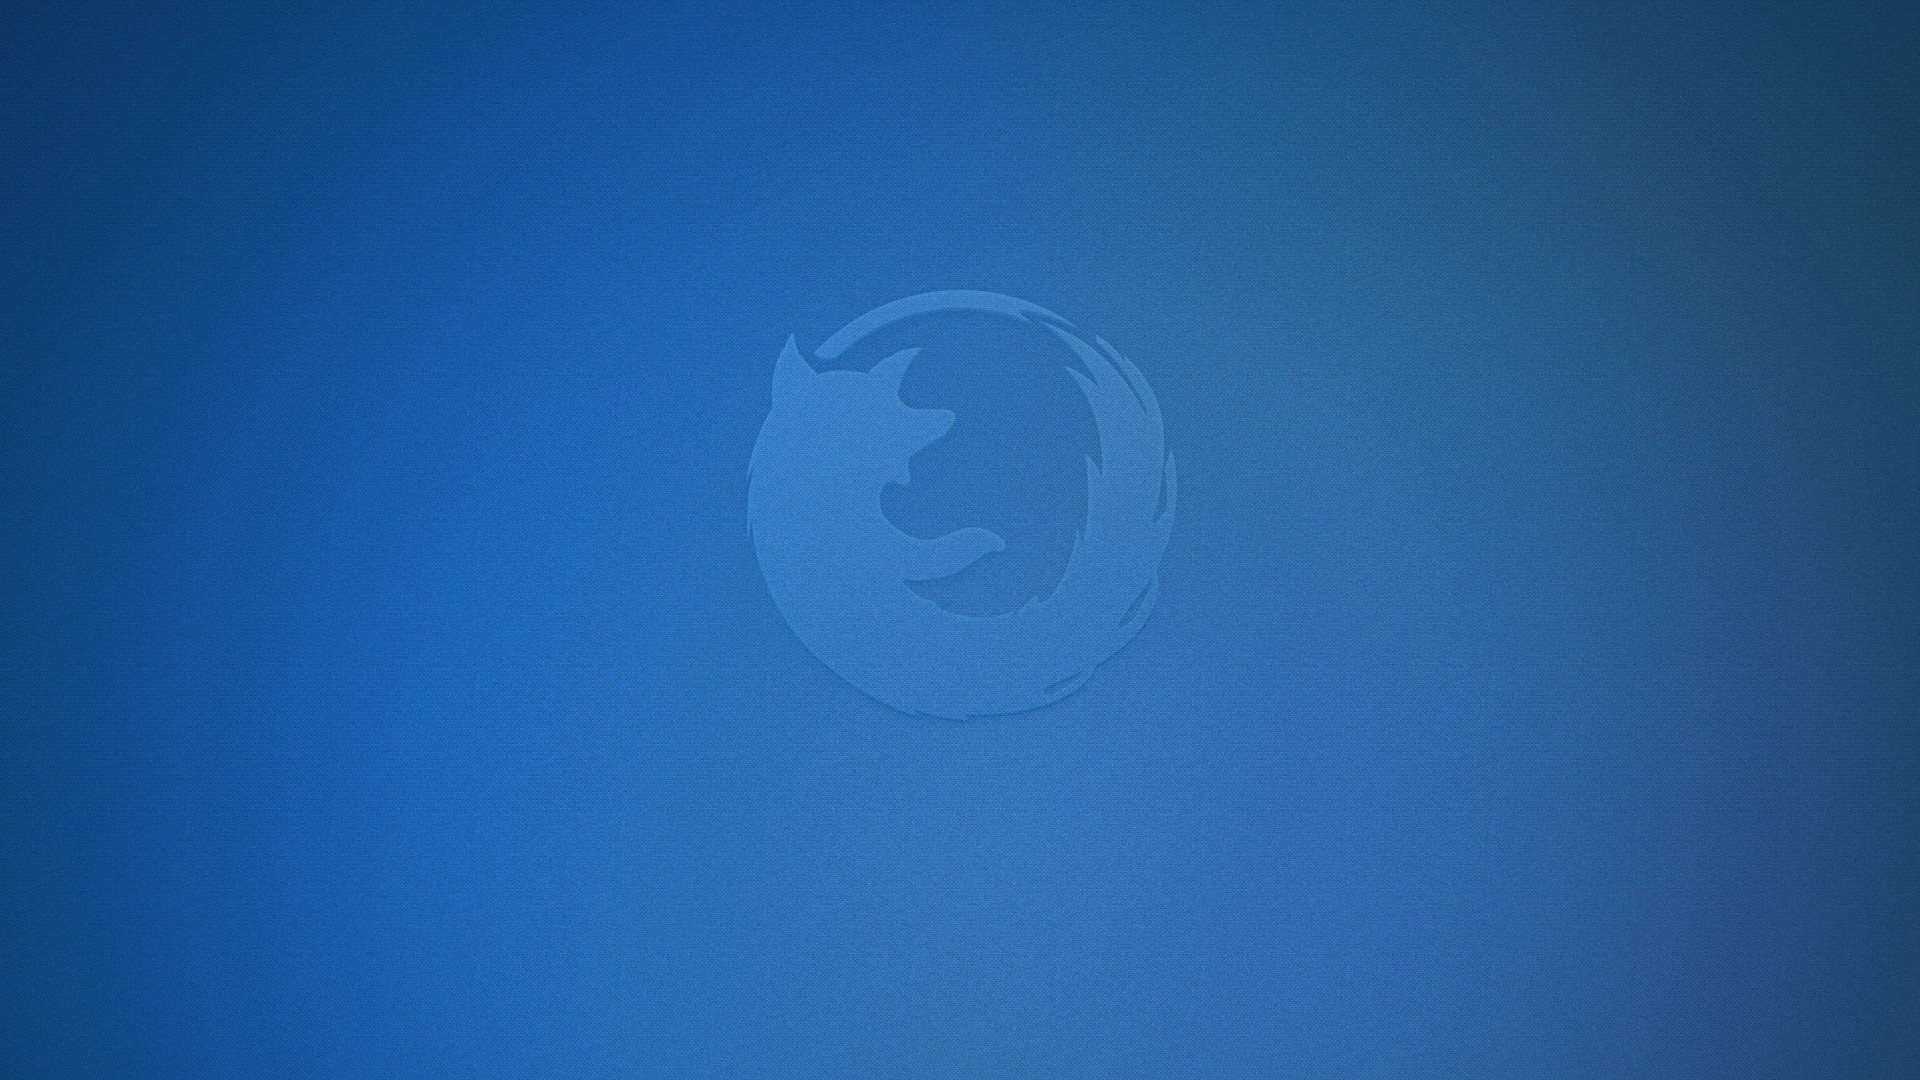 Firefox Amazing Mobile Background Wallpaper Collection